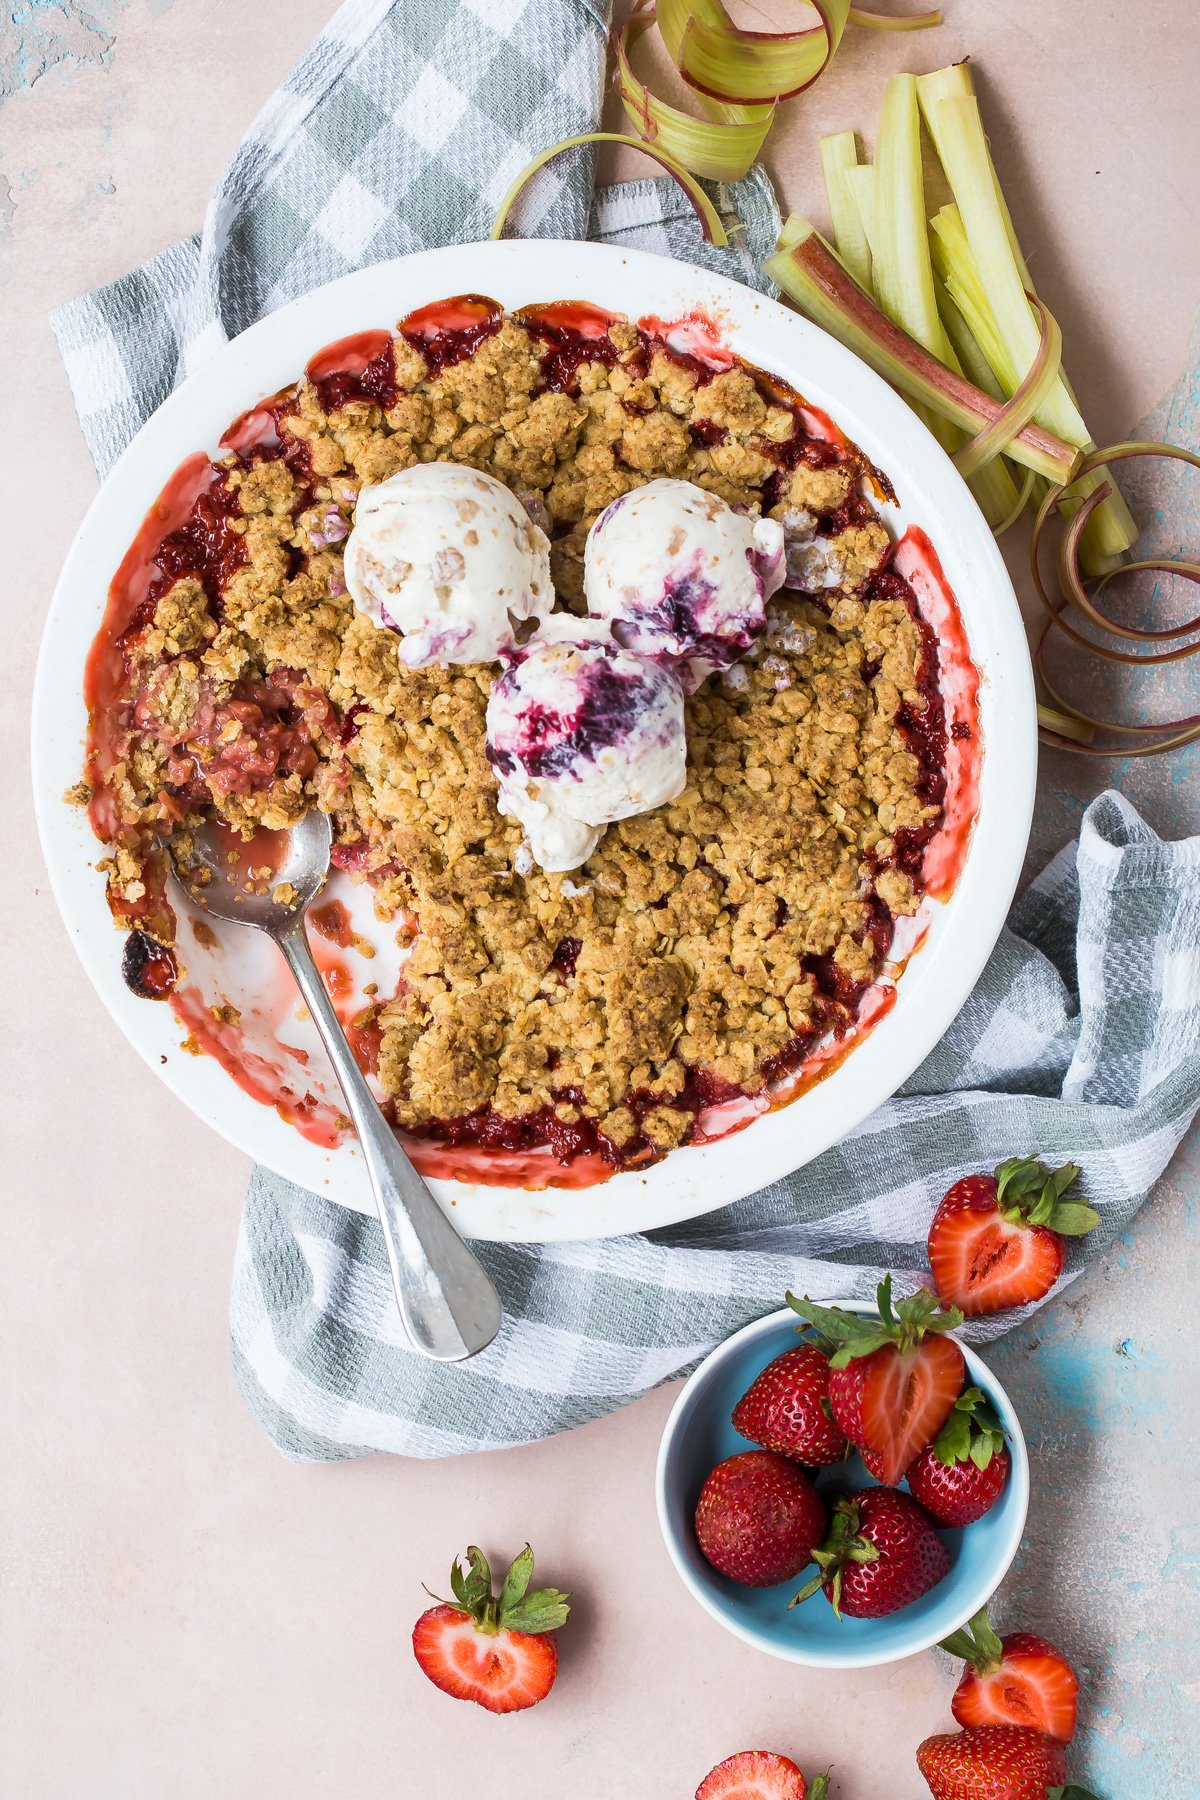 Strawberry rhubarb crumble topped with ice cream.